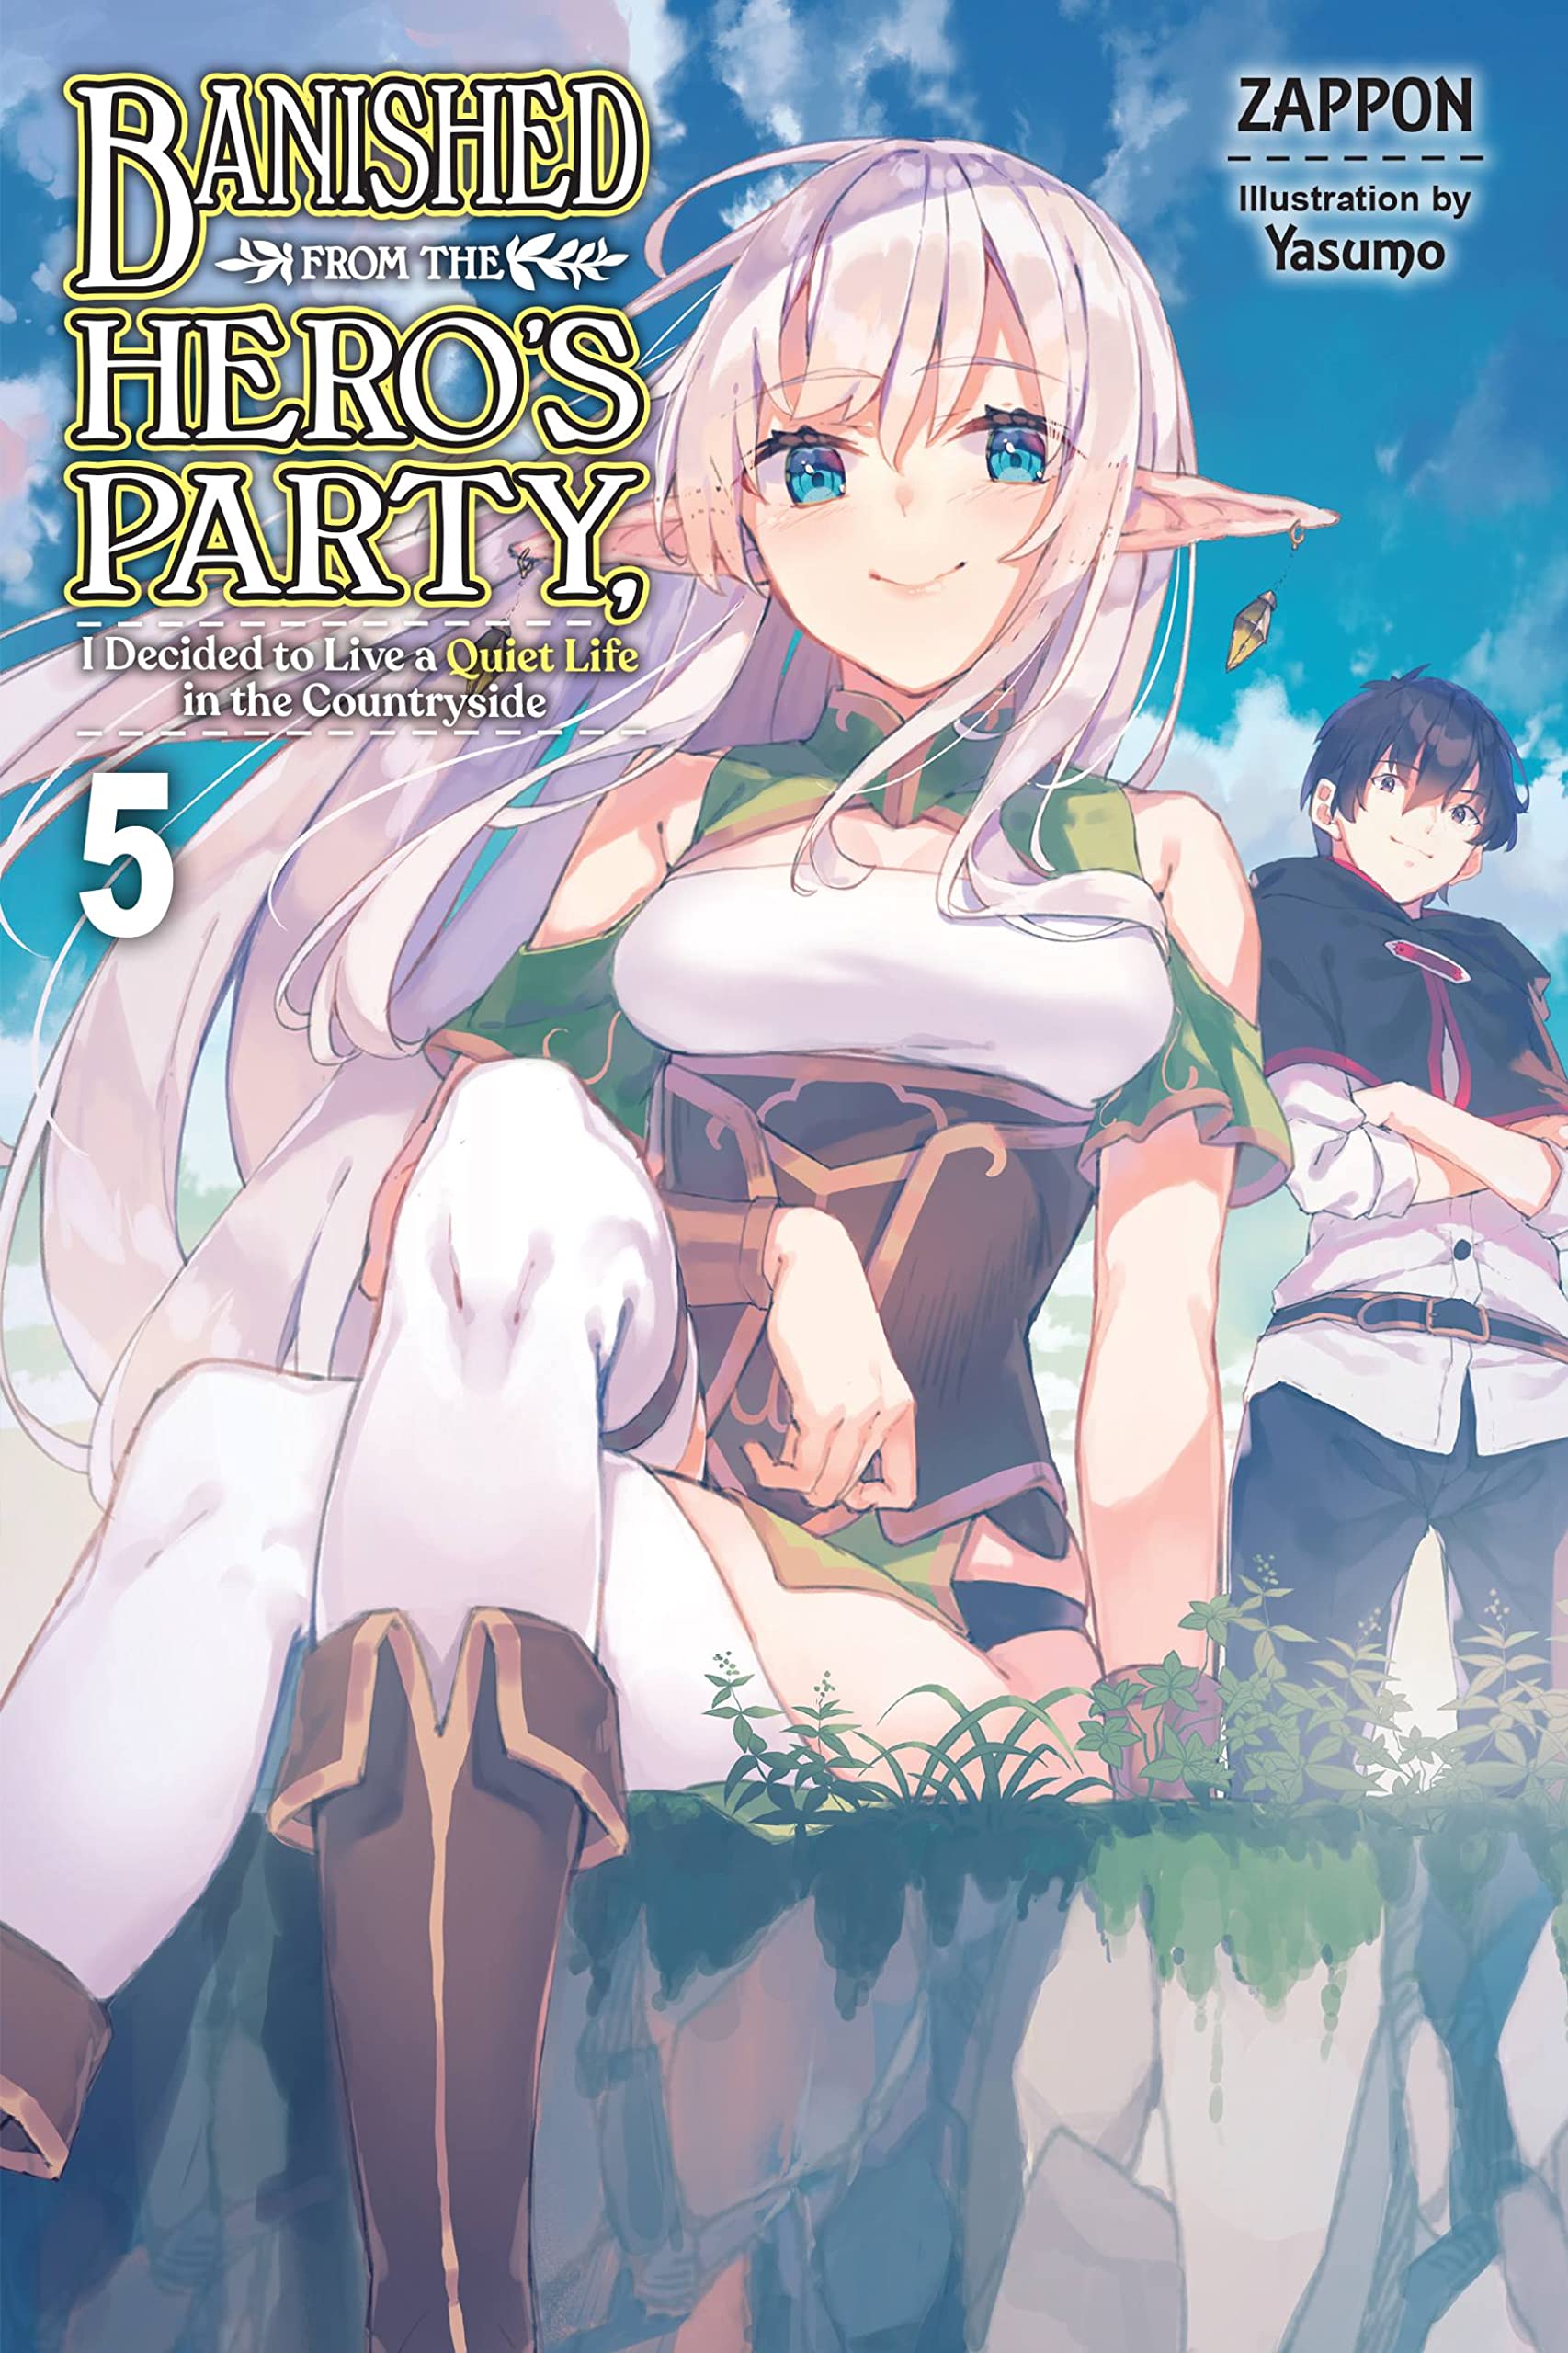 Banished from the Hero's Party, I Decided to Live a Quiet Life in the Countryside Vol. 05 (Light Novel)